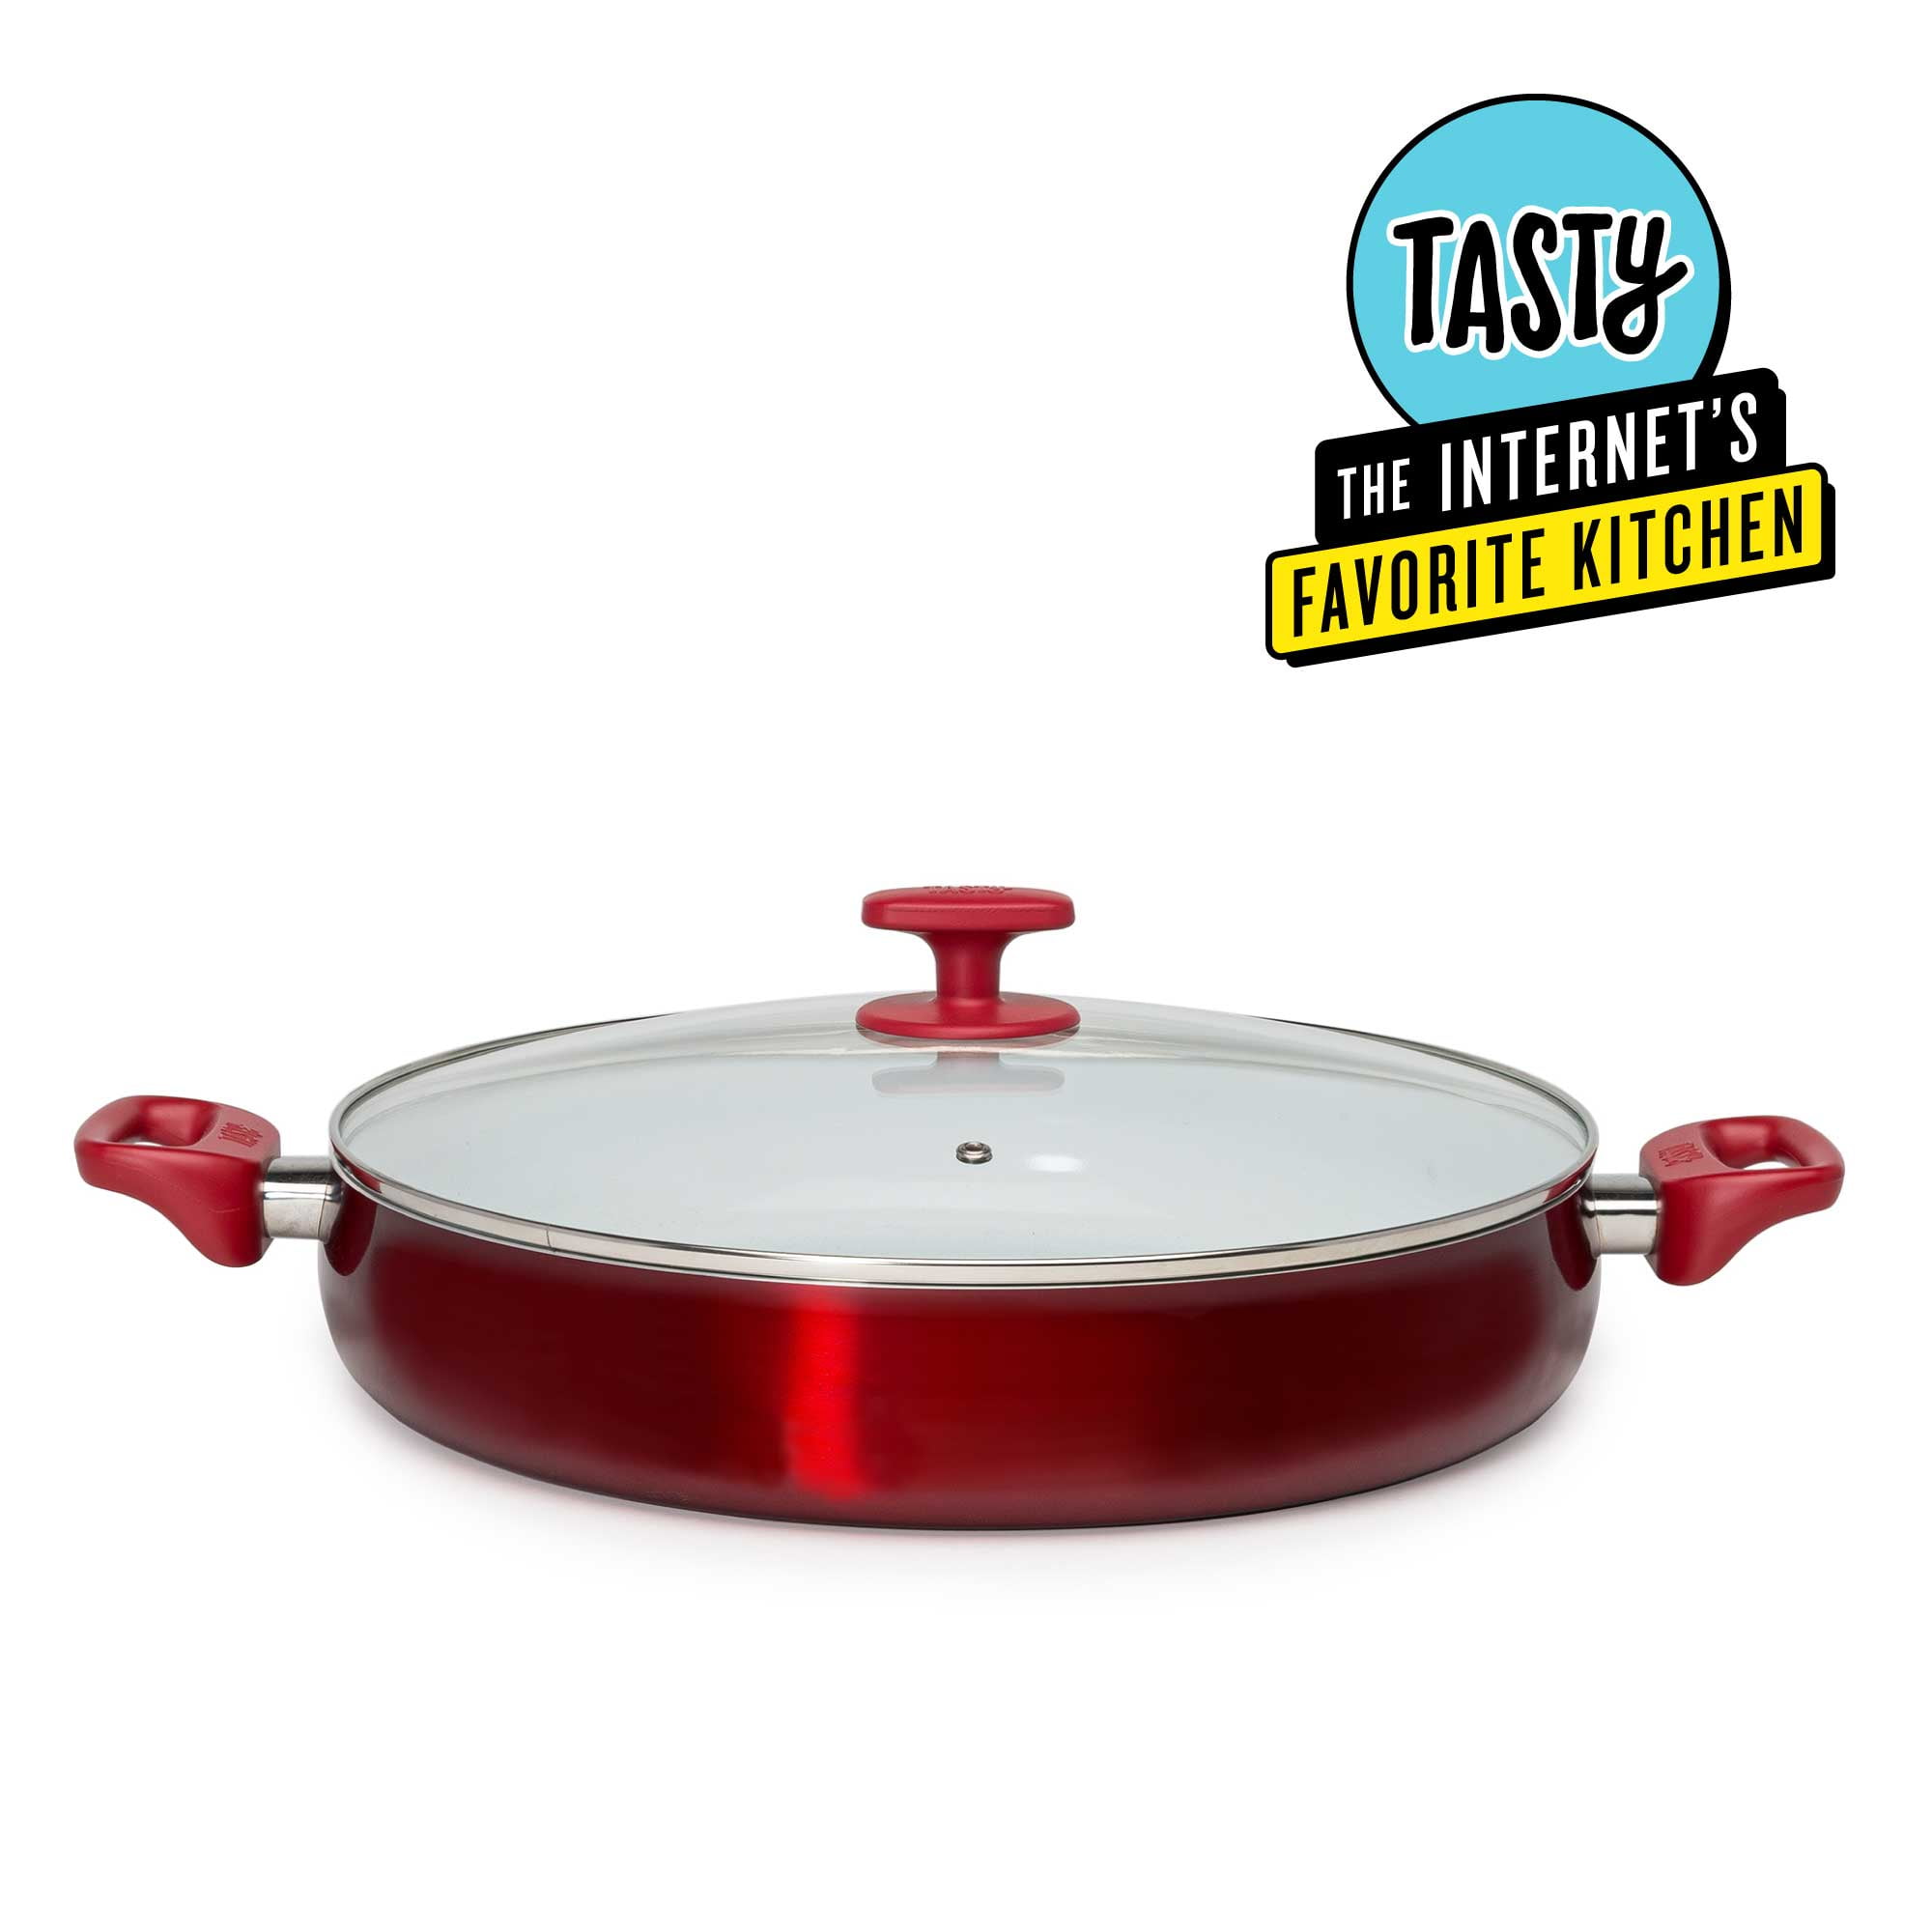 Tasty Ceramic Titanium-Reinforced Non-Stick Centerpiece Pan with Glass Lid, Red, 14"